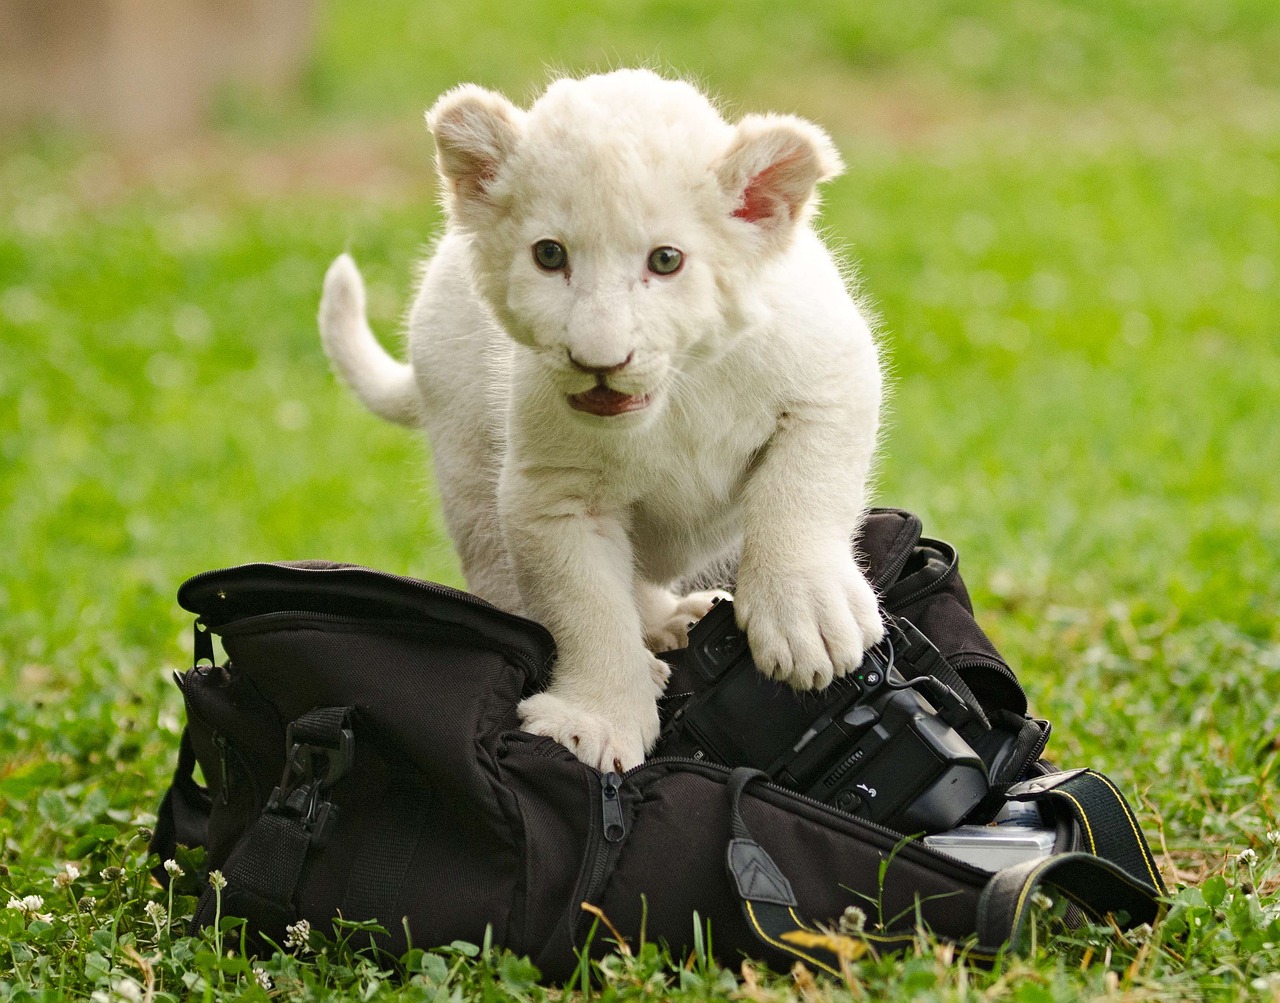 Most Expensive Exotic Pets in the World, a white lion cub